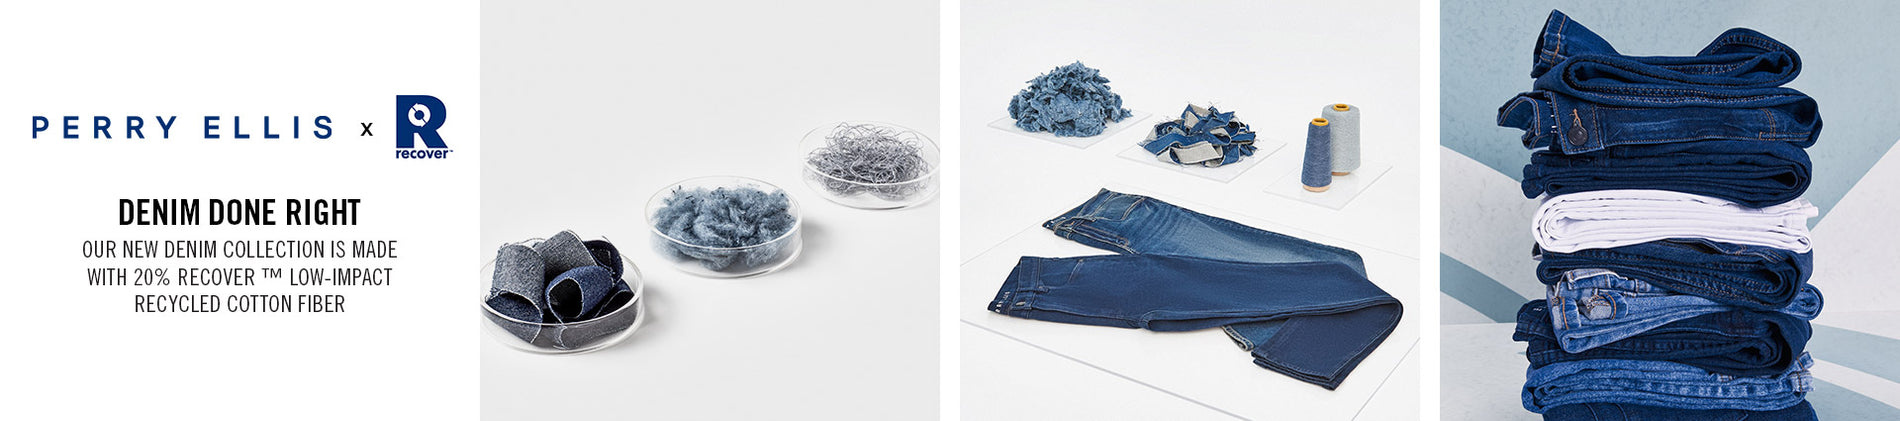 perry ellis x recover - -planet approved denim